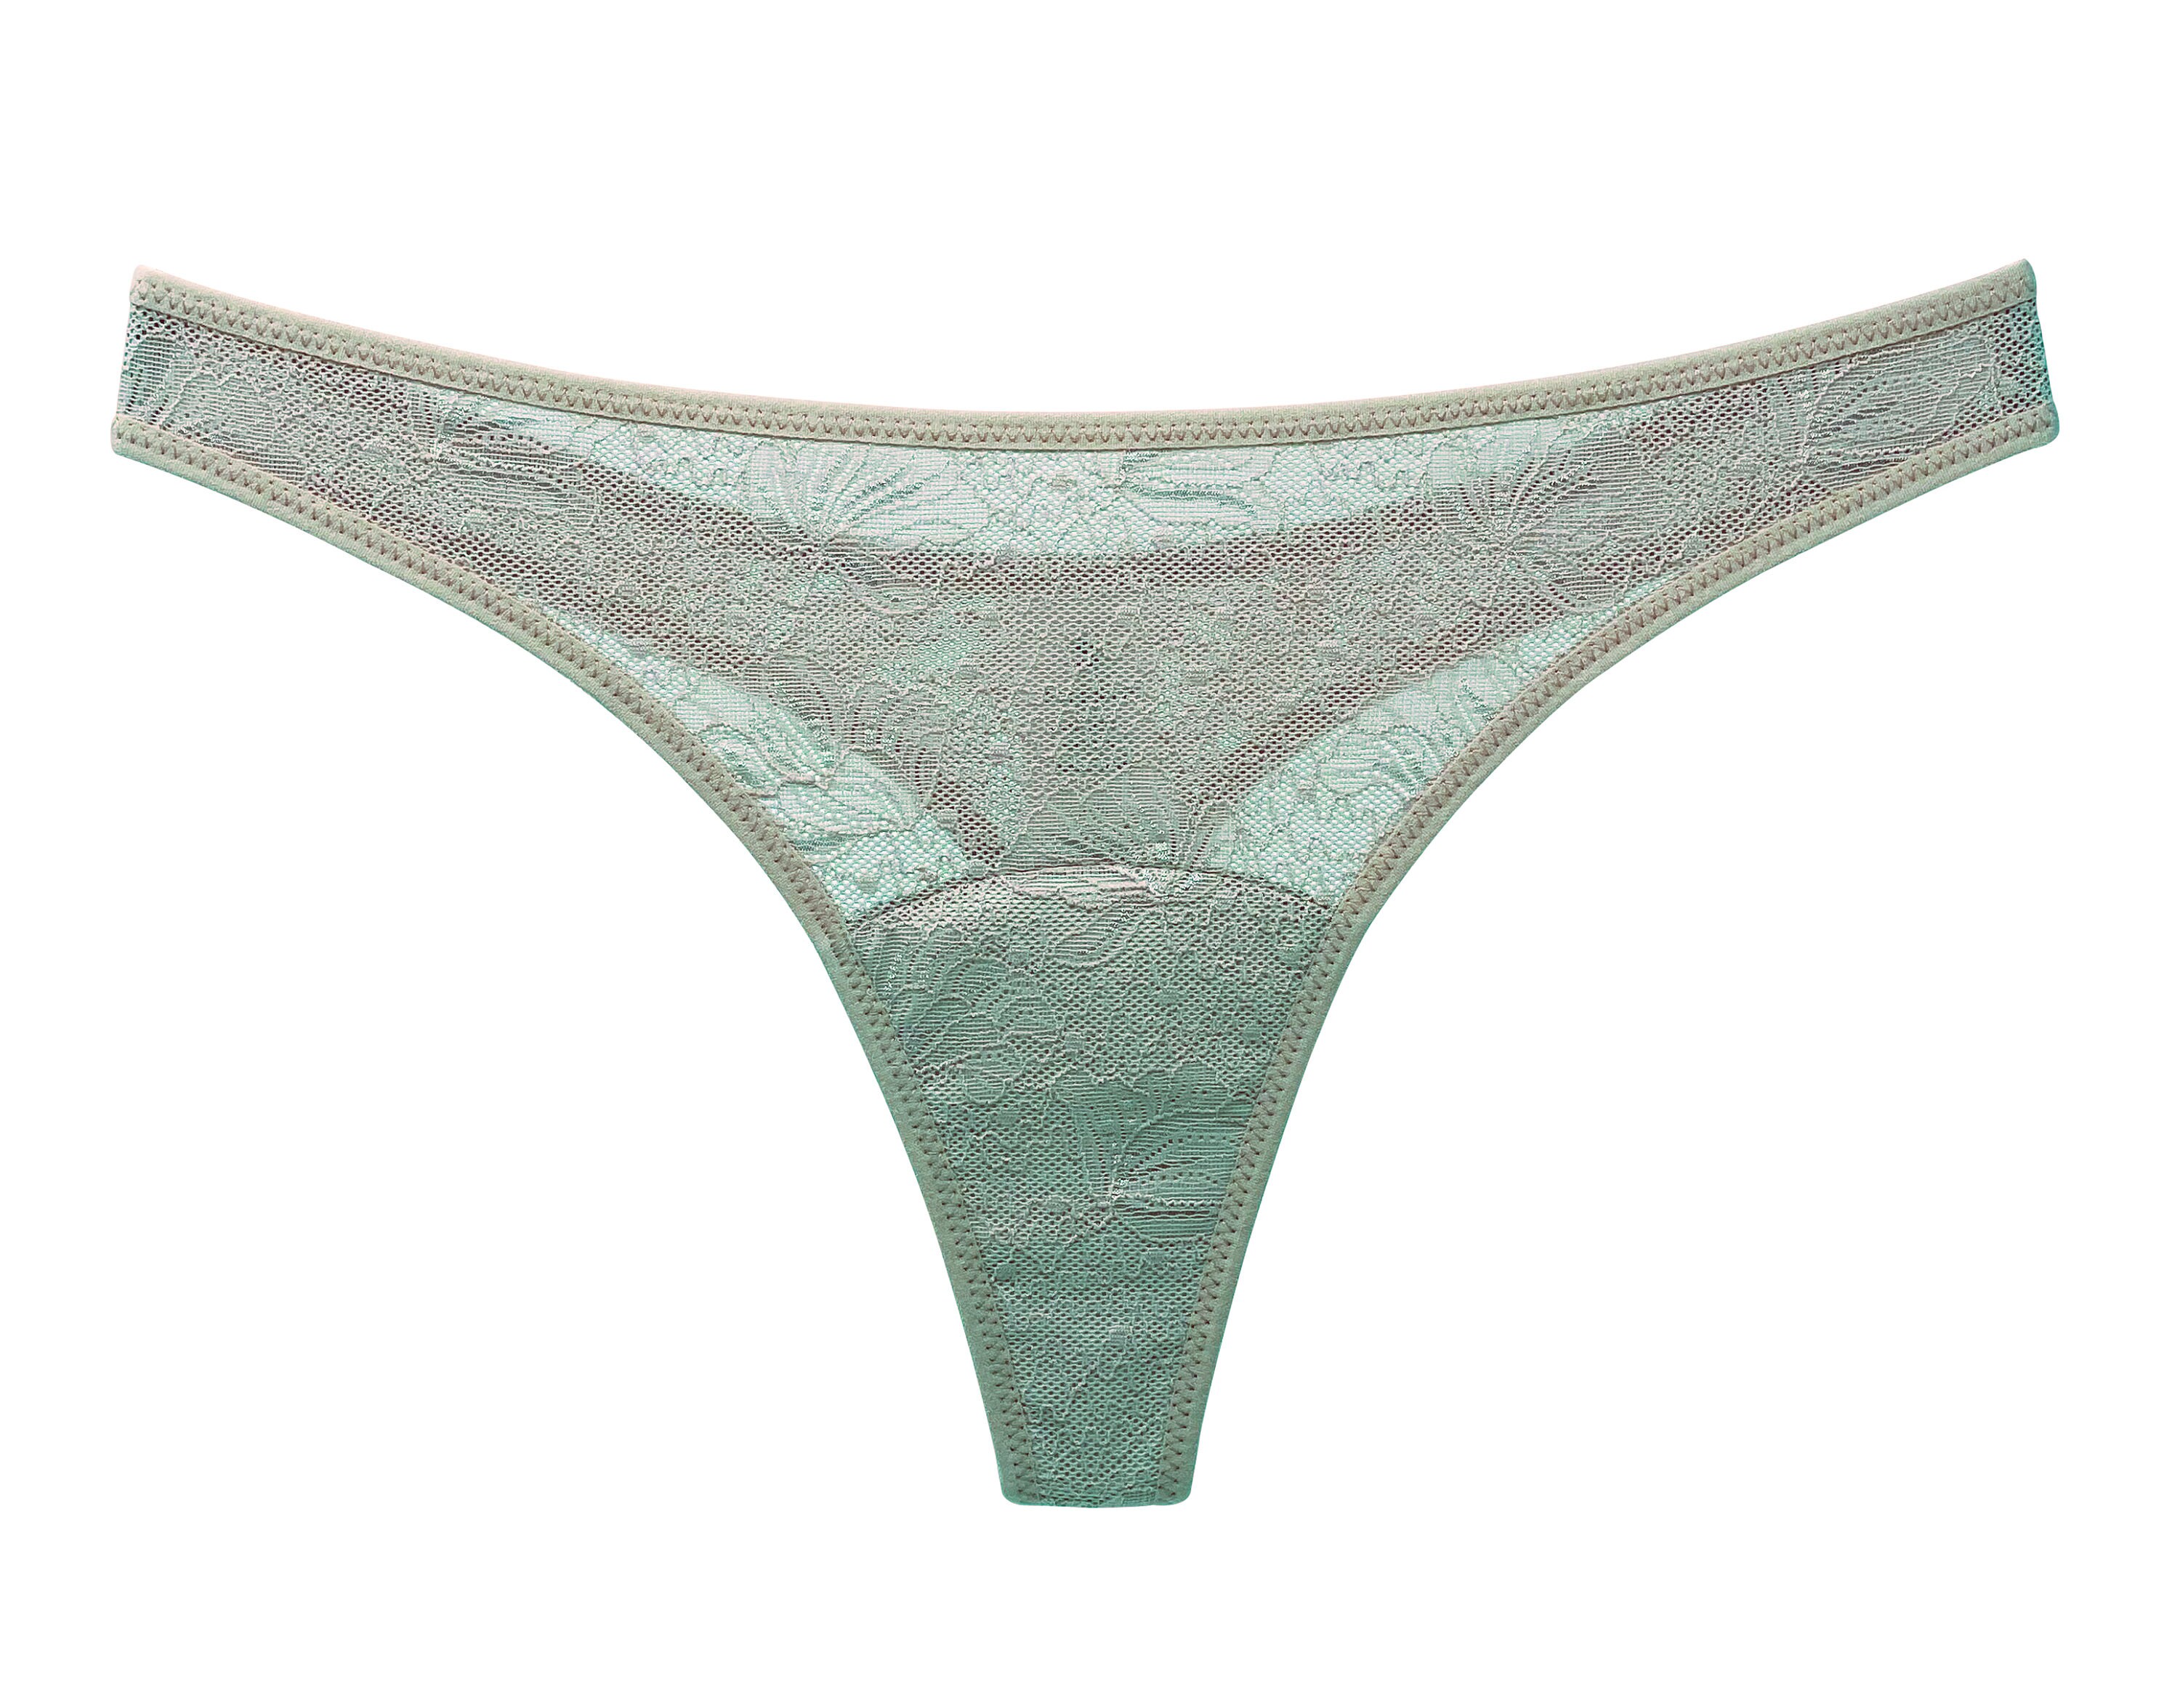 Period Thong Panty Leak Proof Underwear Organic Cotton Absorbent